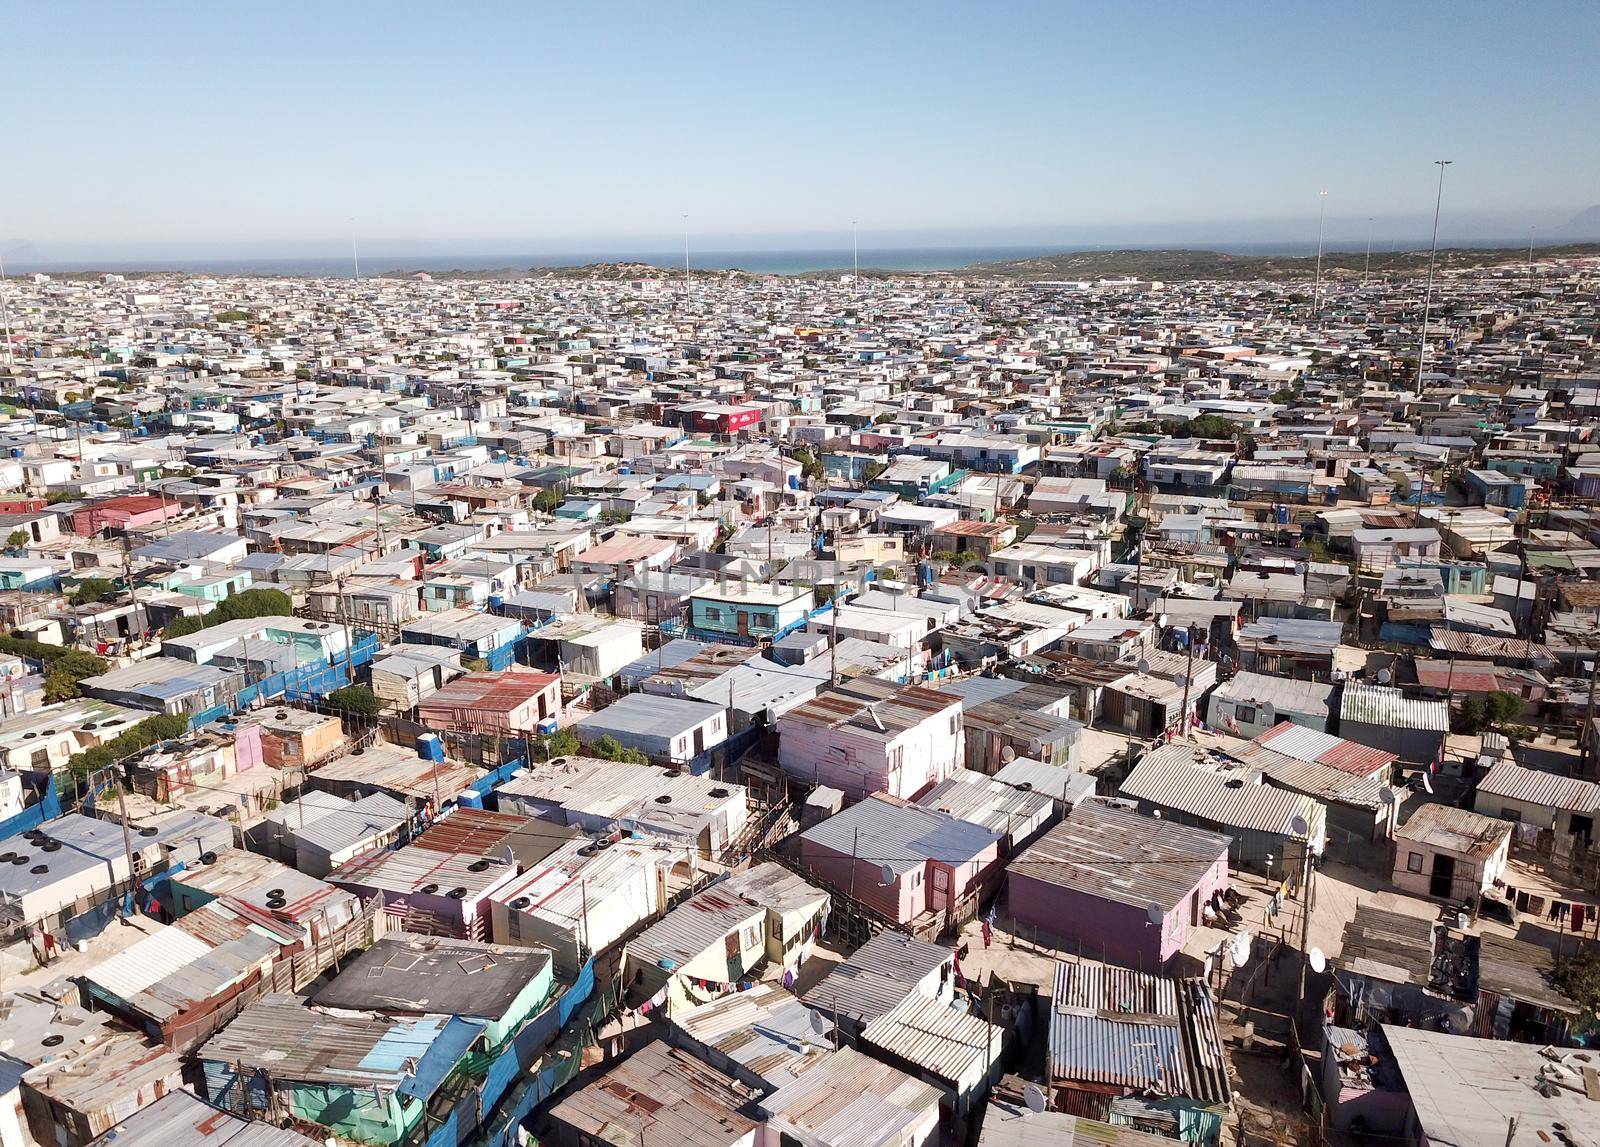 Aerial view over a township near Cape Town, South Africa by fivepointsix